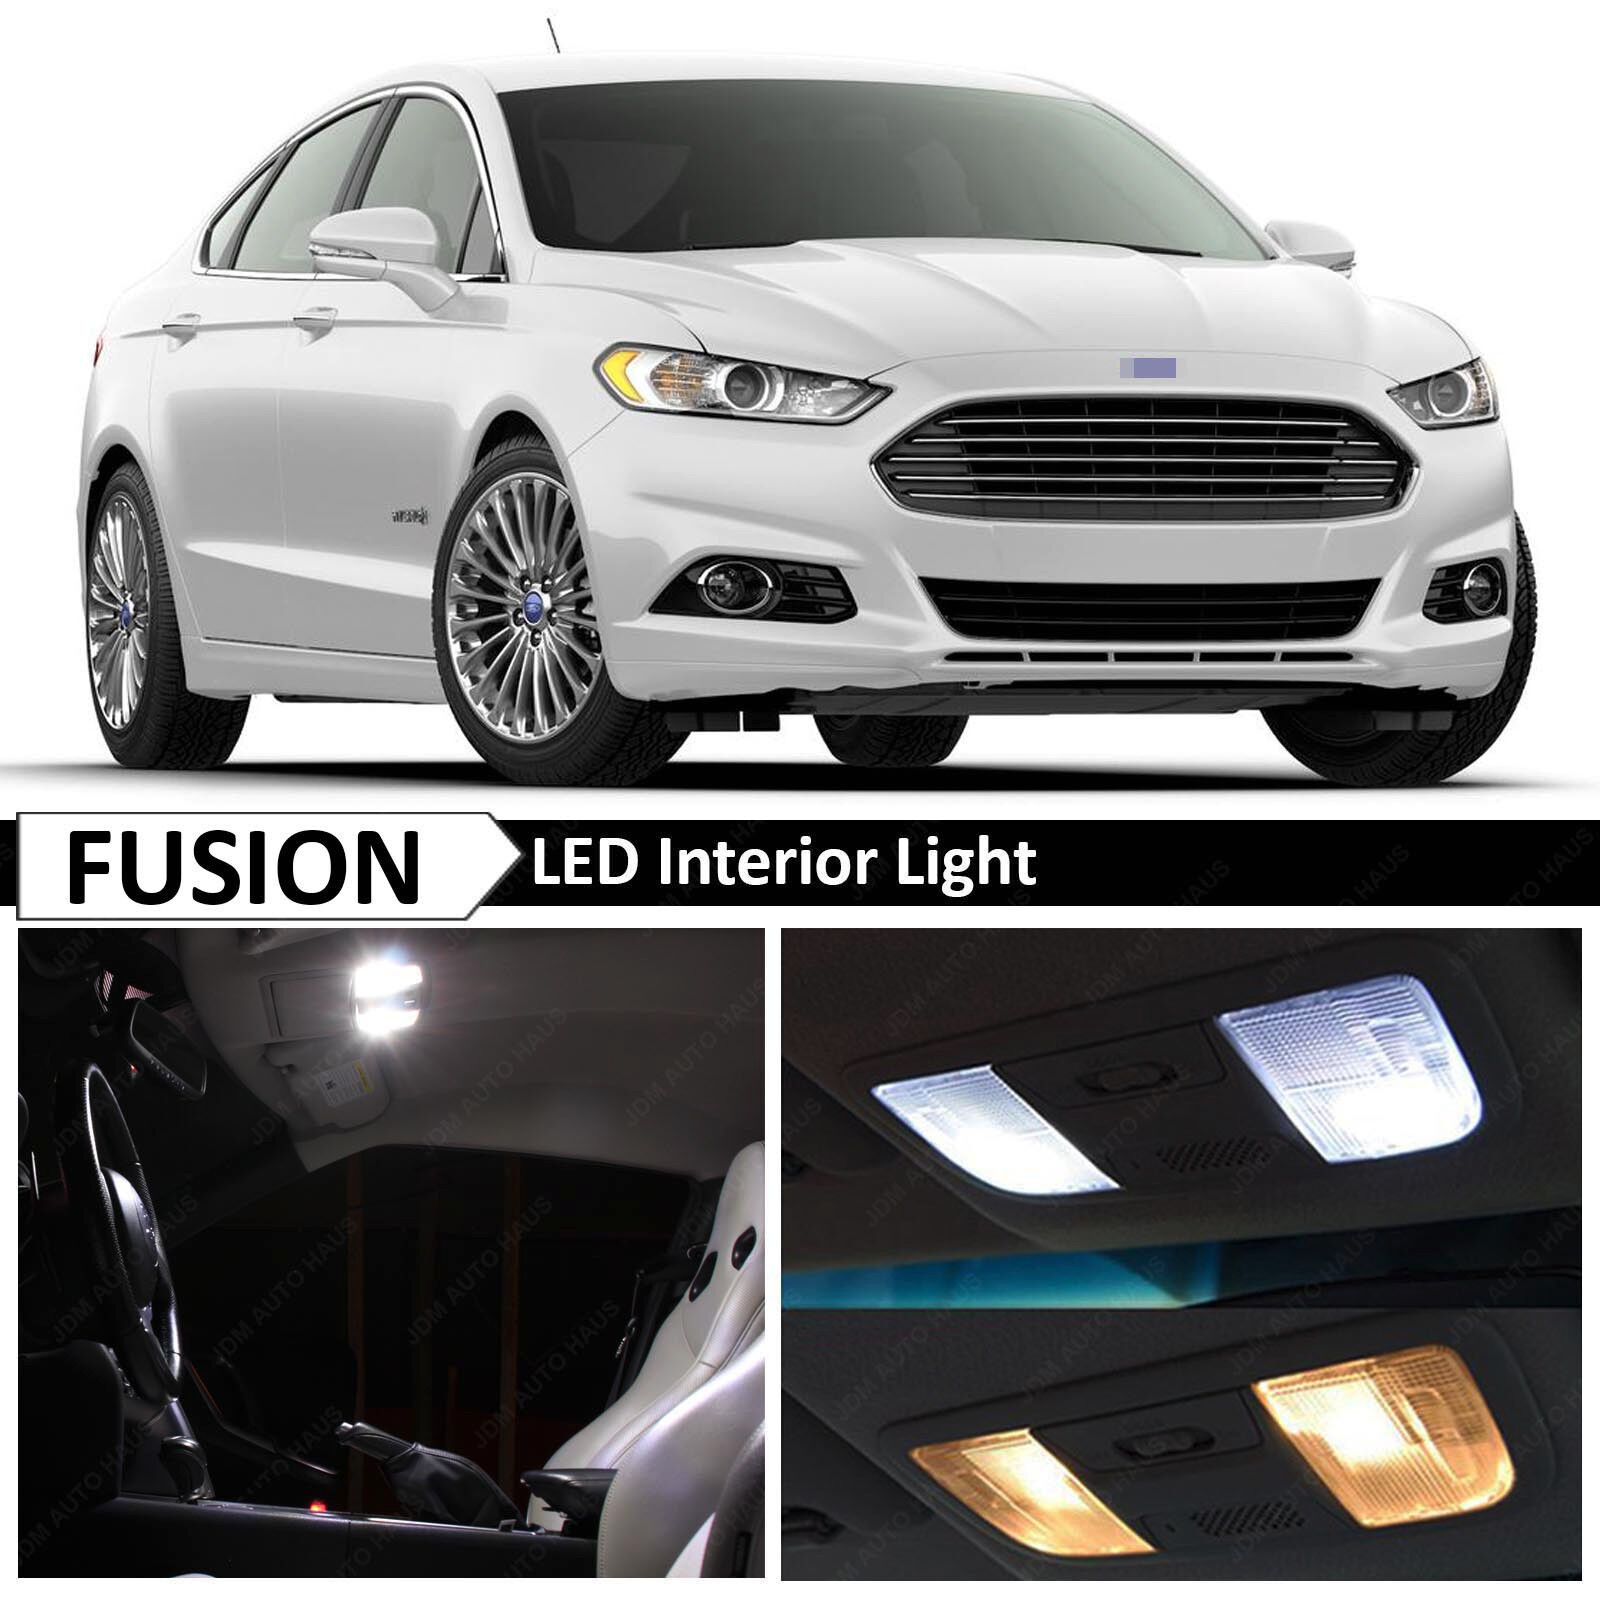 16x White Interior LED Light Package Kit for 2010-2014 Ford Fusion